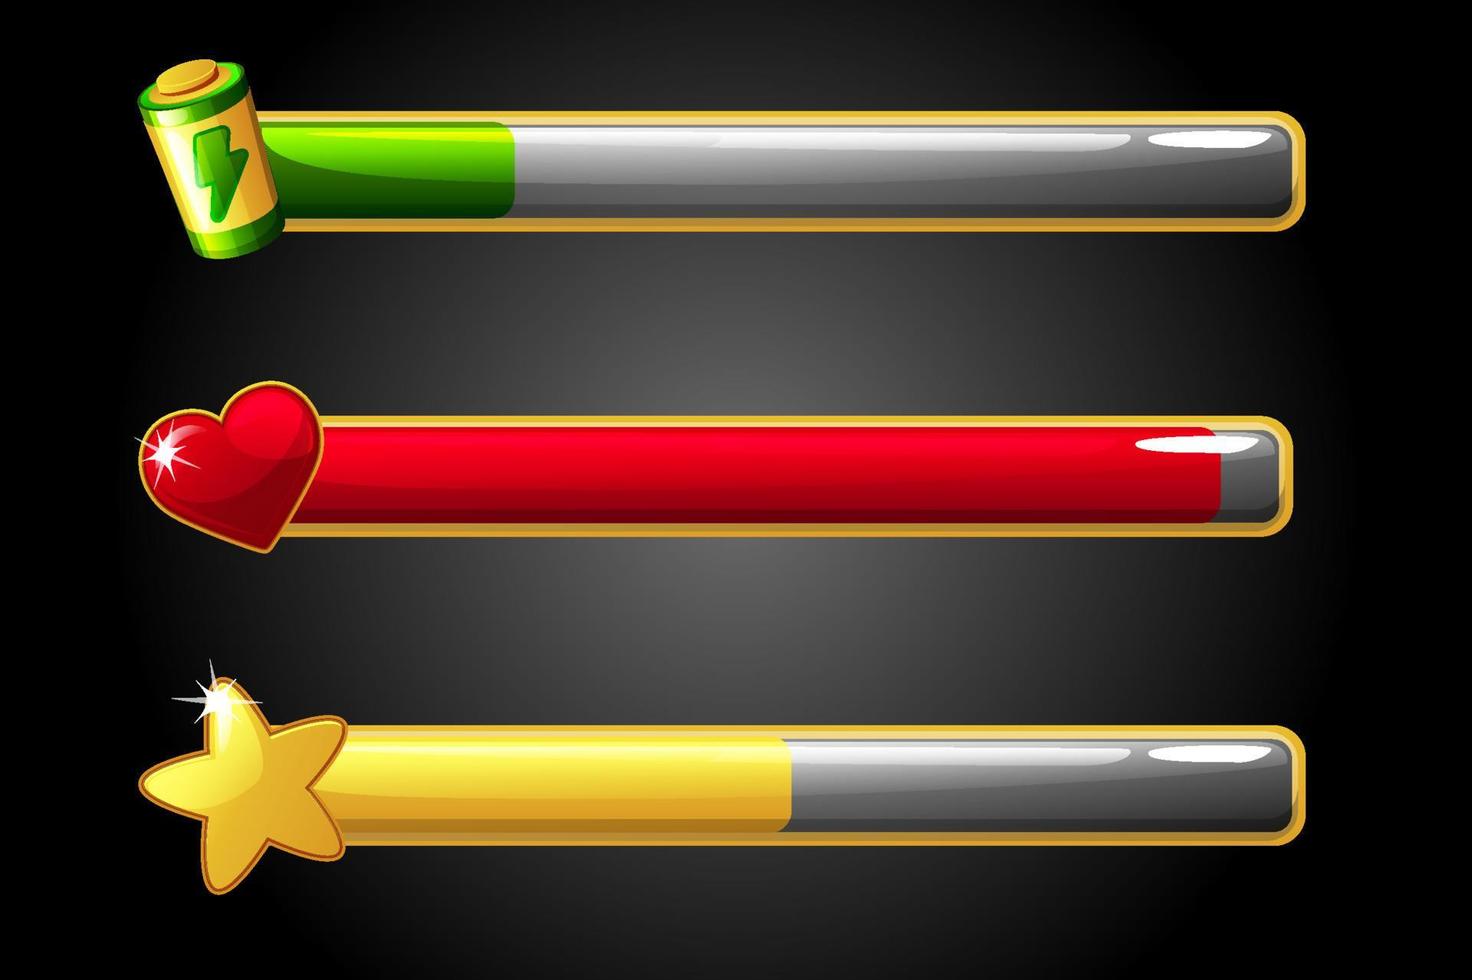 Set bar scale energy, life and level in the game. Vector illustration heart and star gaming icons for gui.